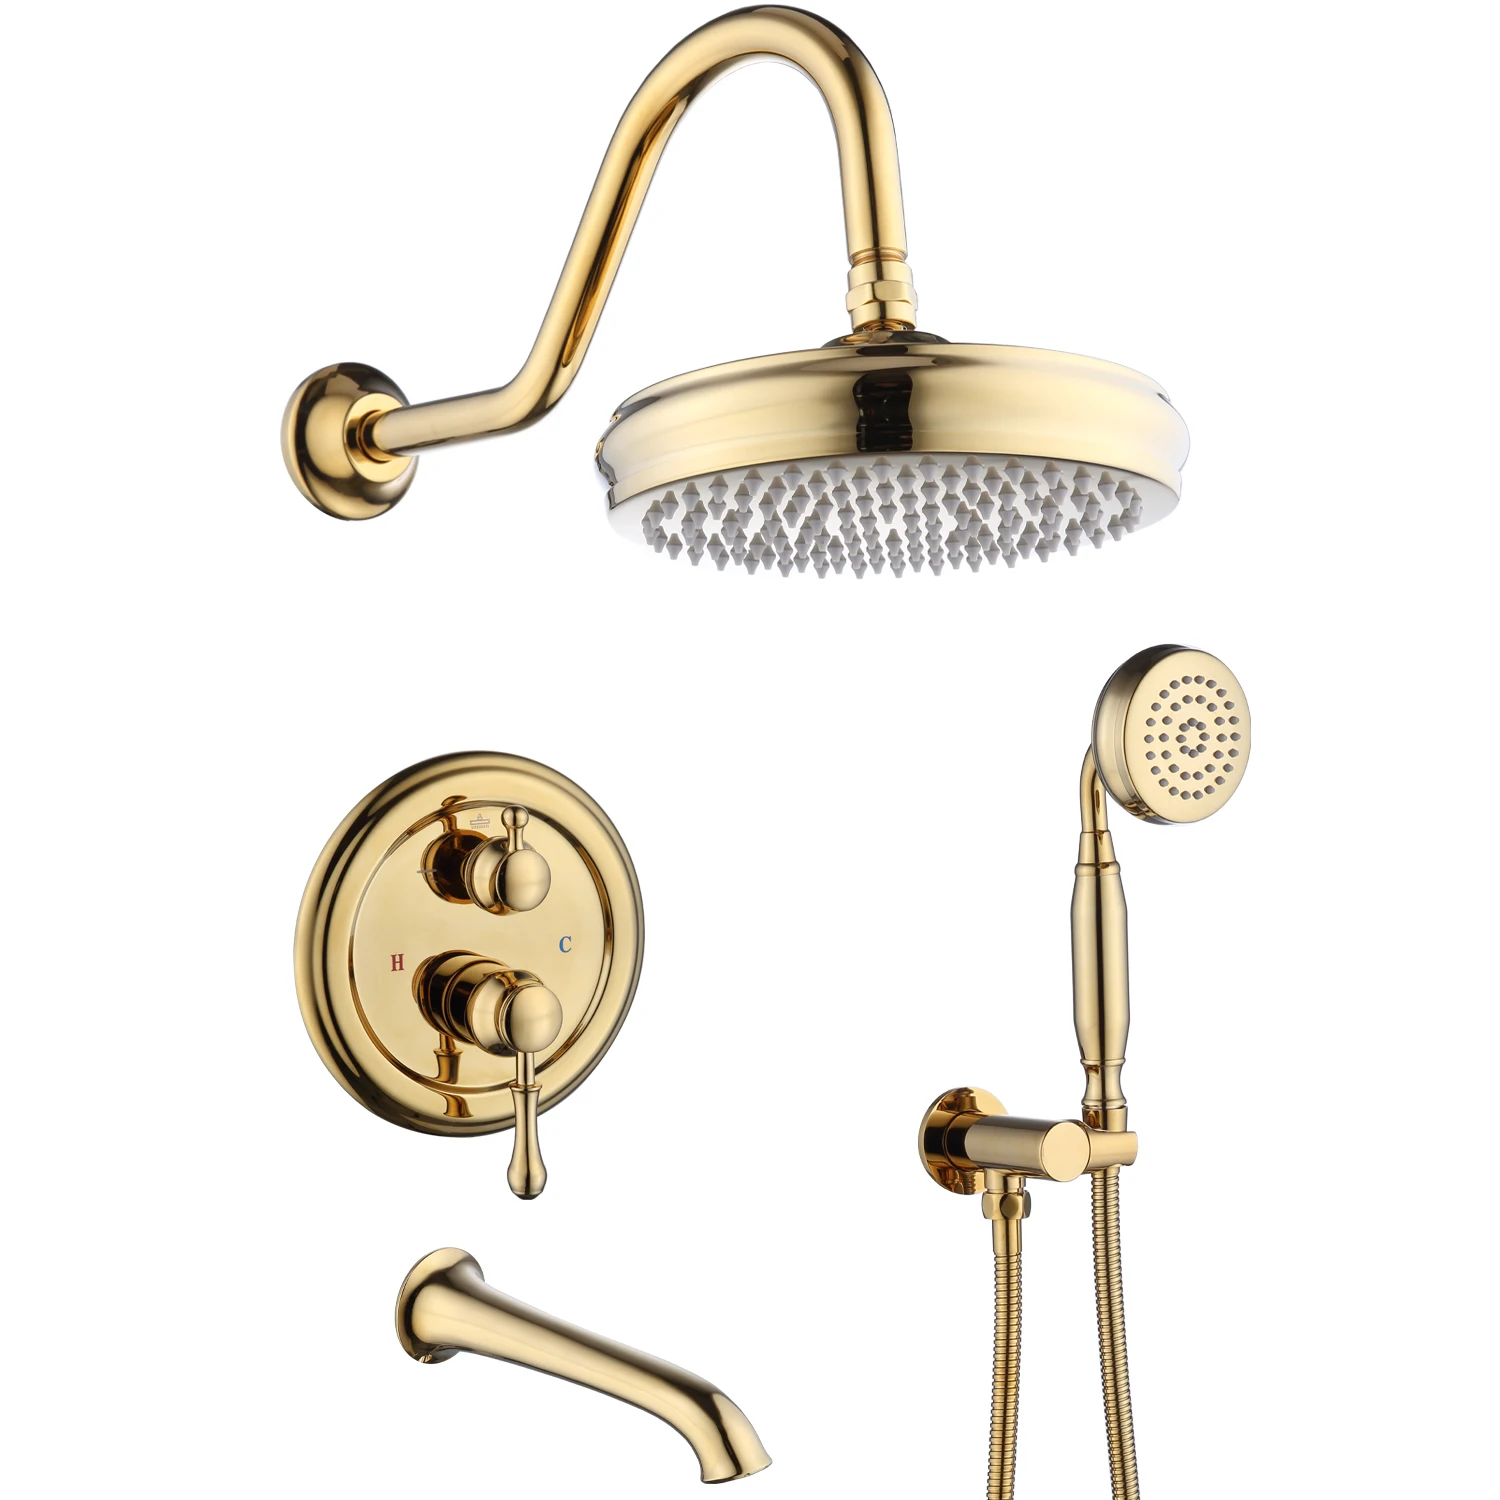 

Concealed Bathroom System Mixer High Pressure Rainfall Shower Head with Handheld Shower and Tub Spout Brushed Gold Shower Set